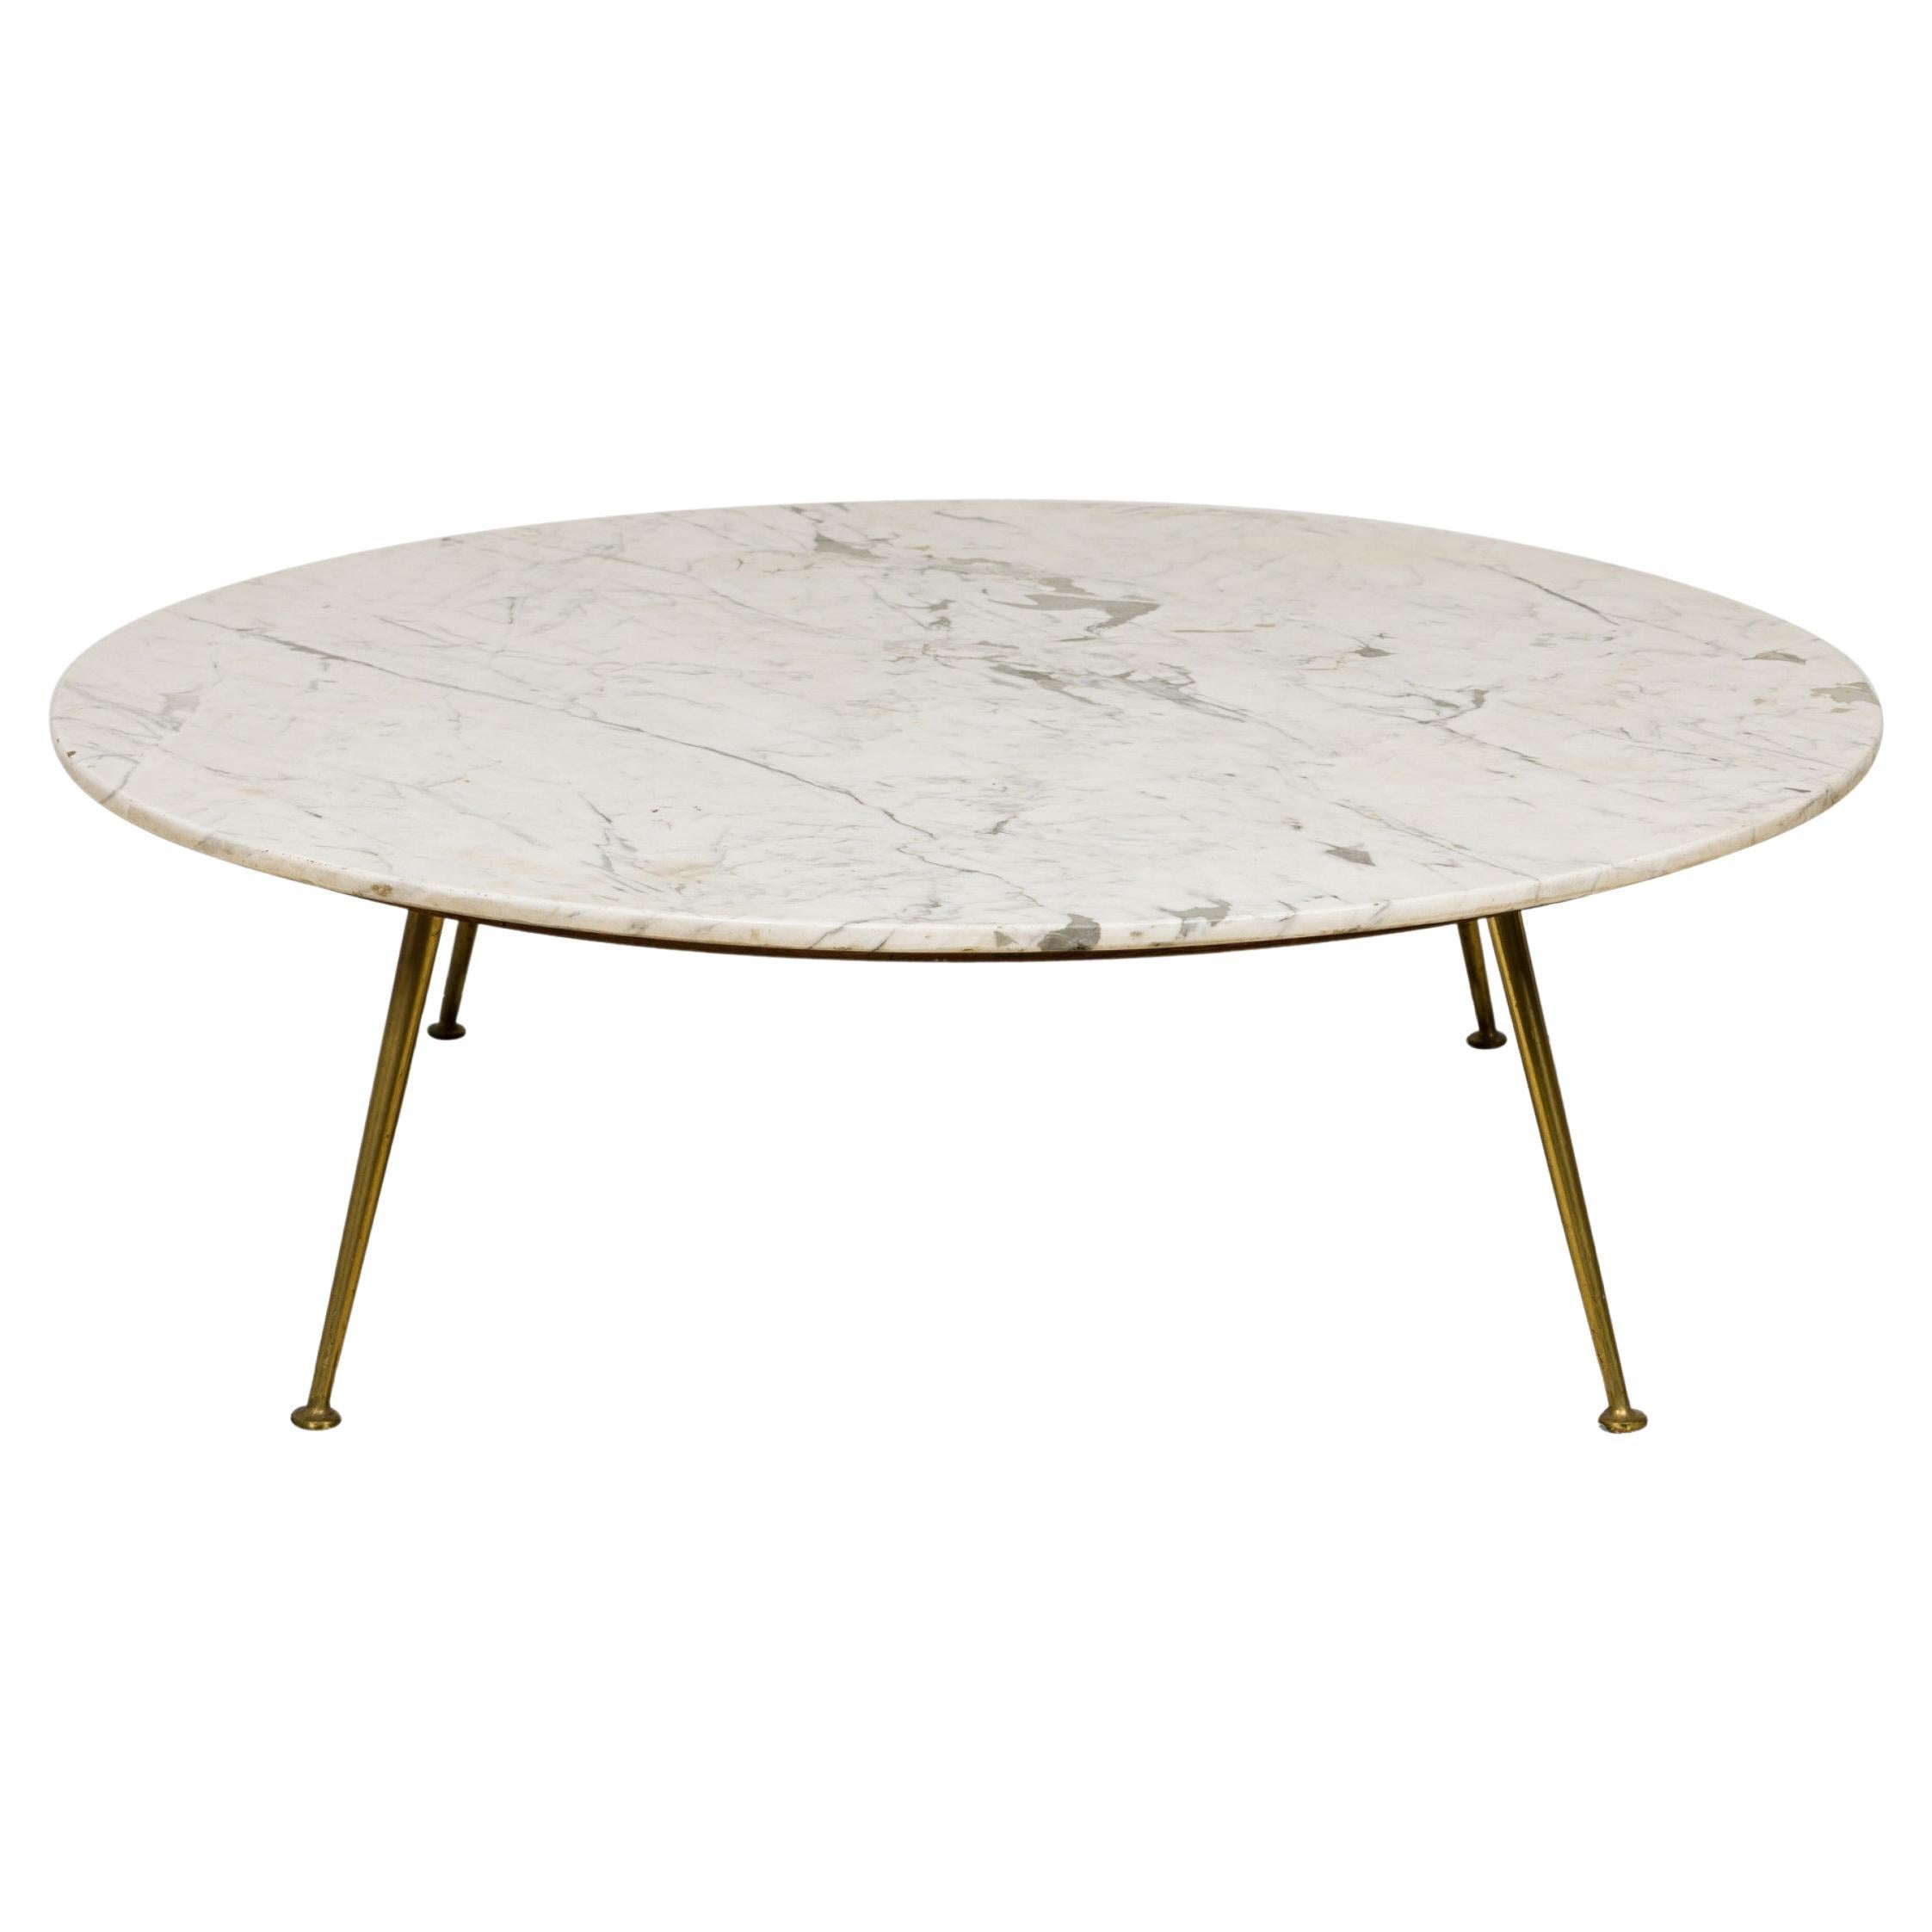 Italian Carrera Marble Round Coffee / Cocktail Table